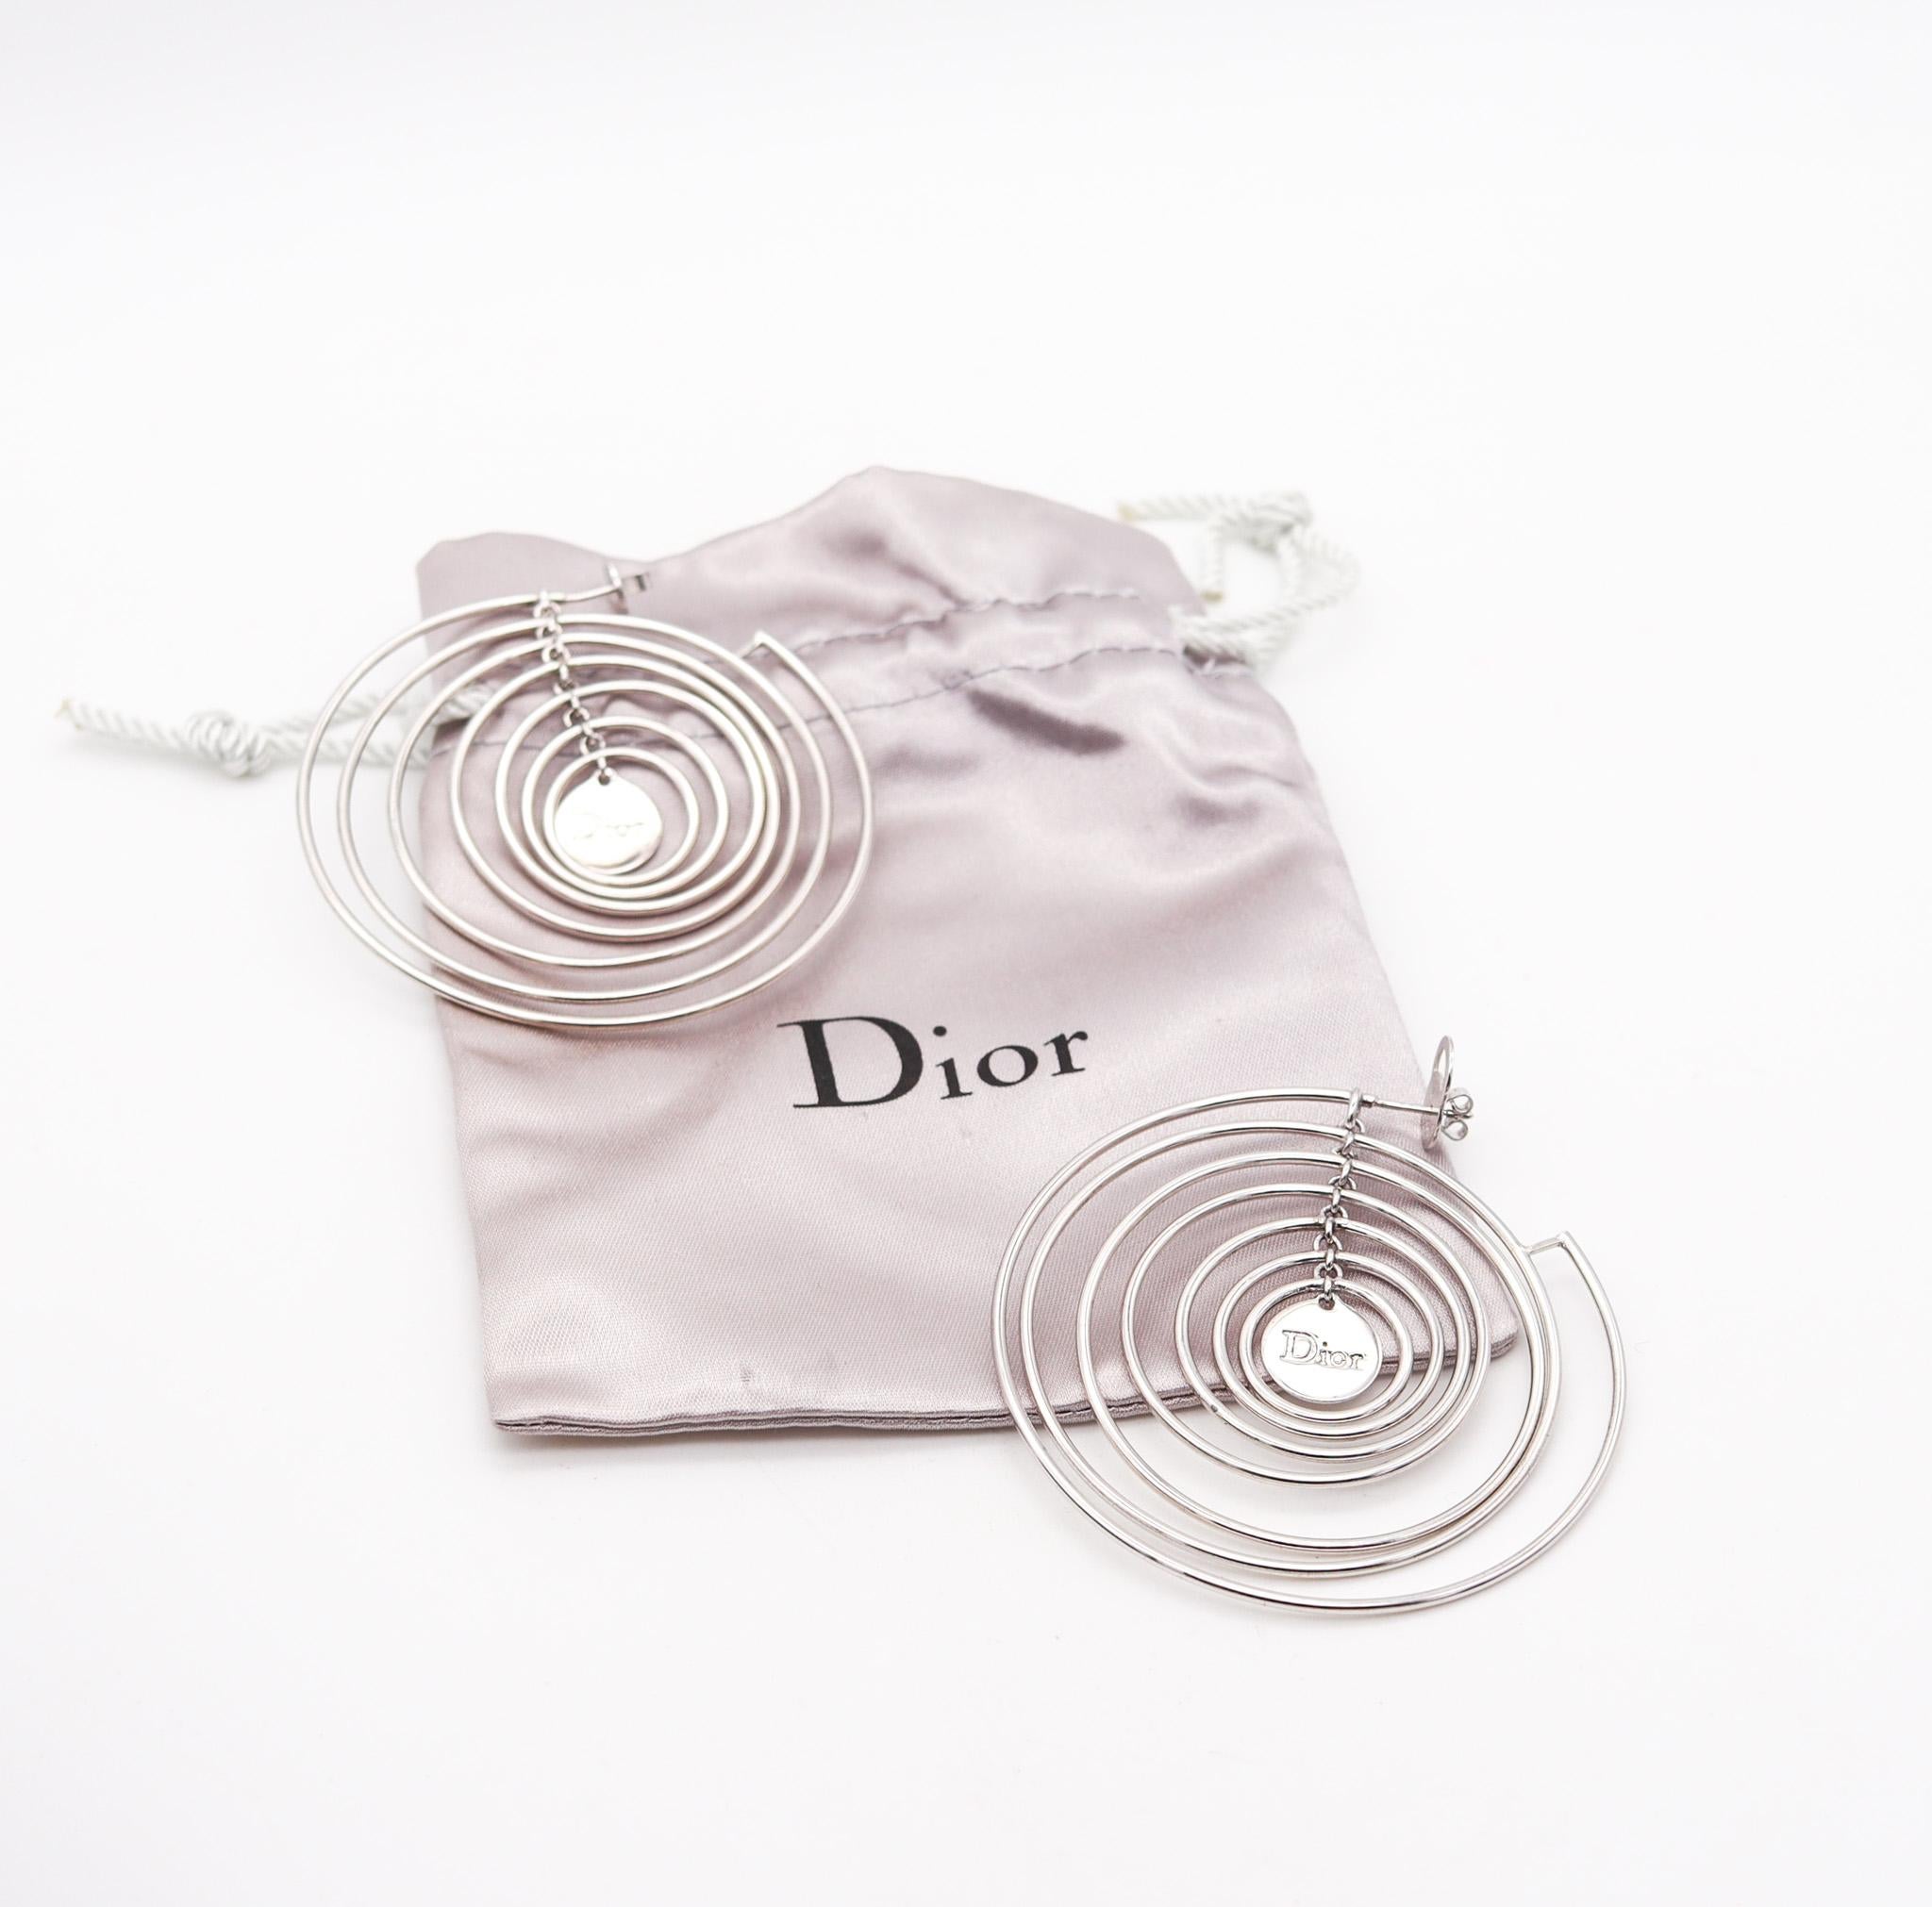 kinetic sculptural circles earrings designed by Christian Dior.

Fabulous kinetic dangle earrings, created in Paris France at the atelier of Christian Dior. These ultra modernist earrings are very artistic and has been crafted in solid .925/.999